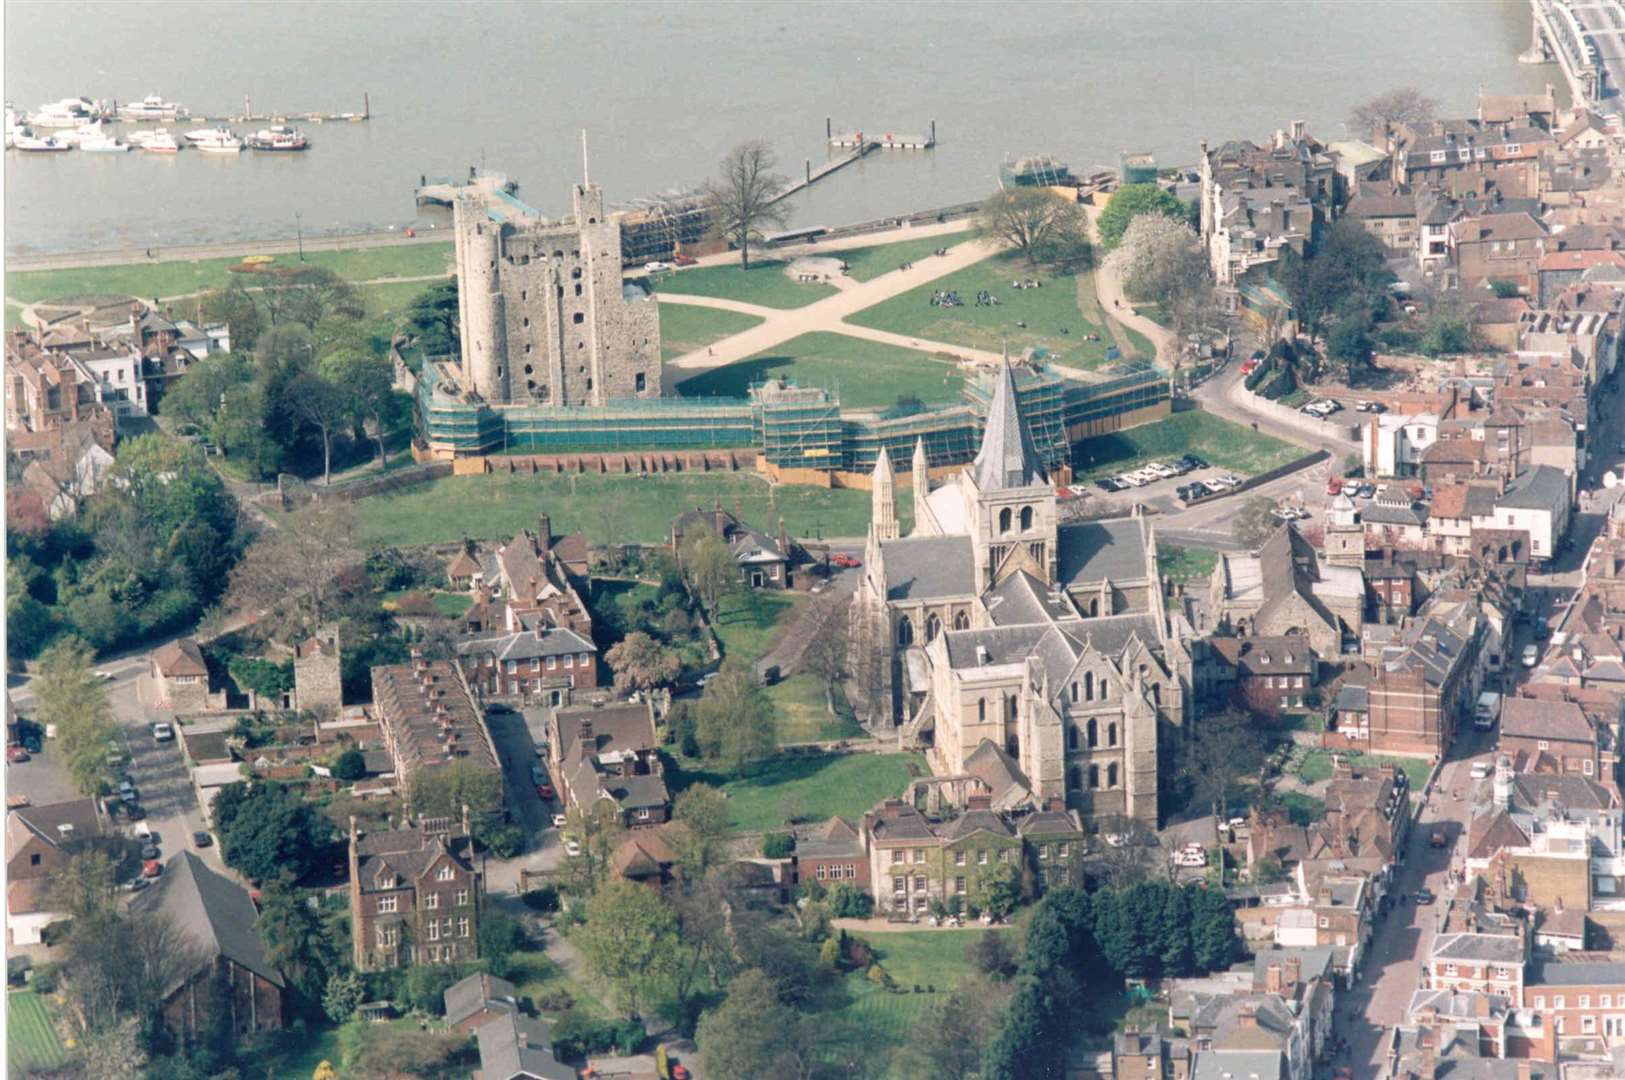 Rochester 23 years ago in 1997.